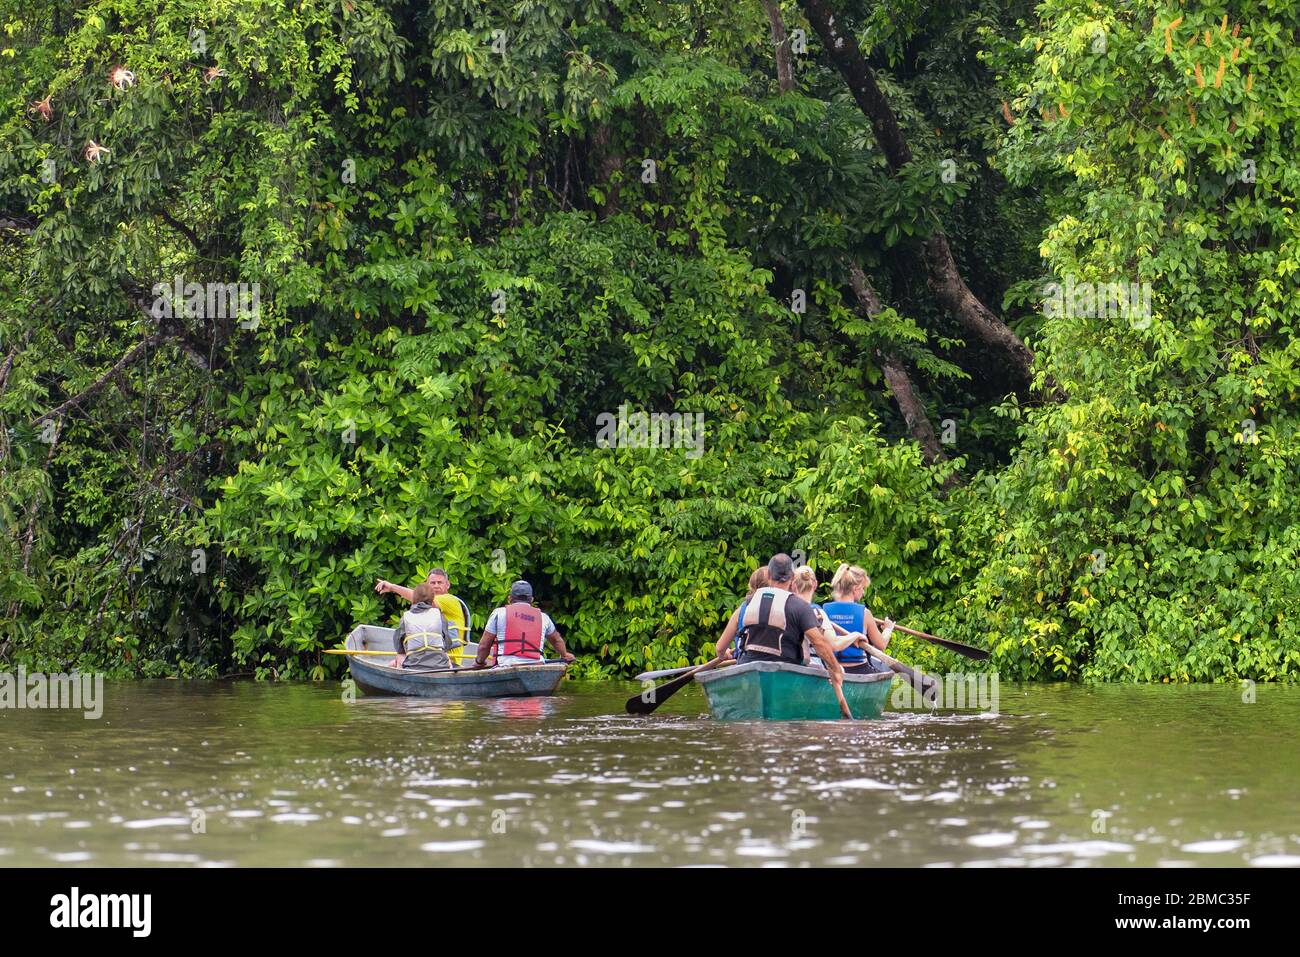 Tourists with rowboat exploring the Rio Tortuguero forest. Ecotourism concept. Costa Rica nature and ecotourism. Stock Photo